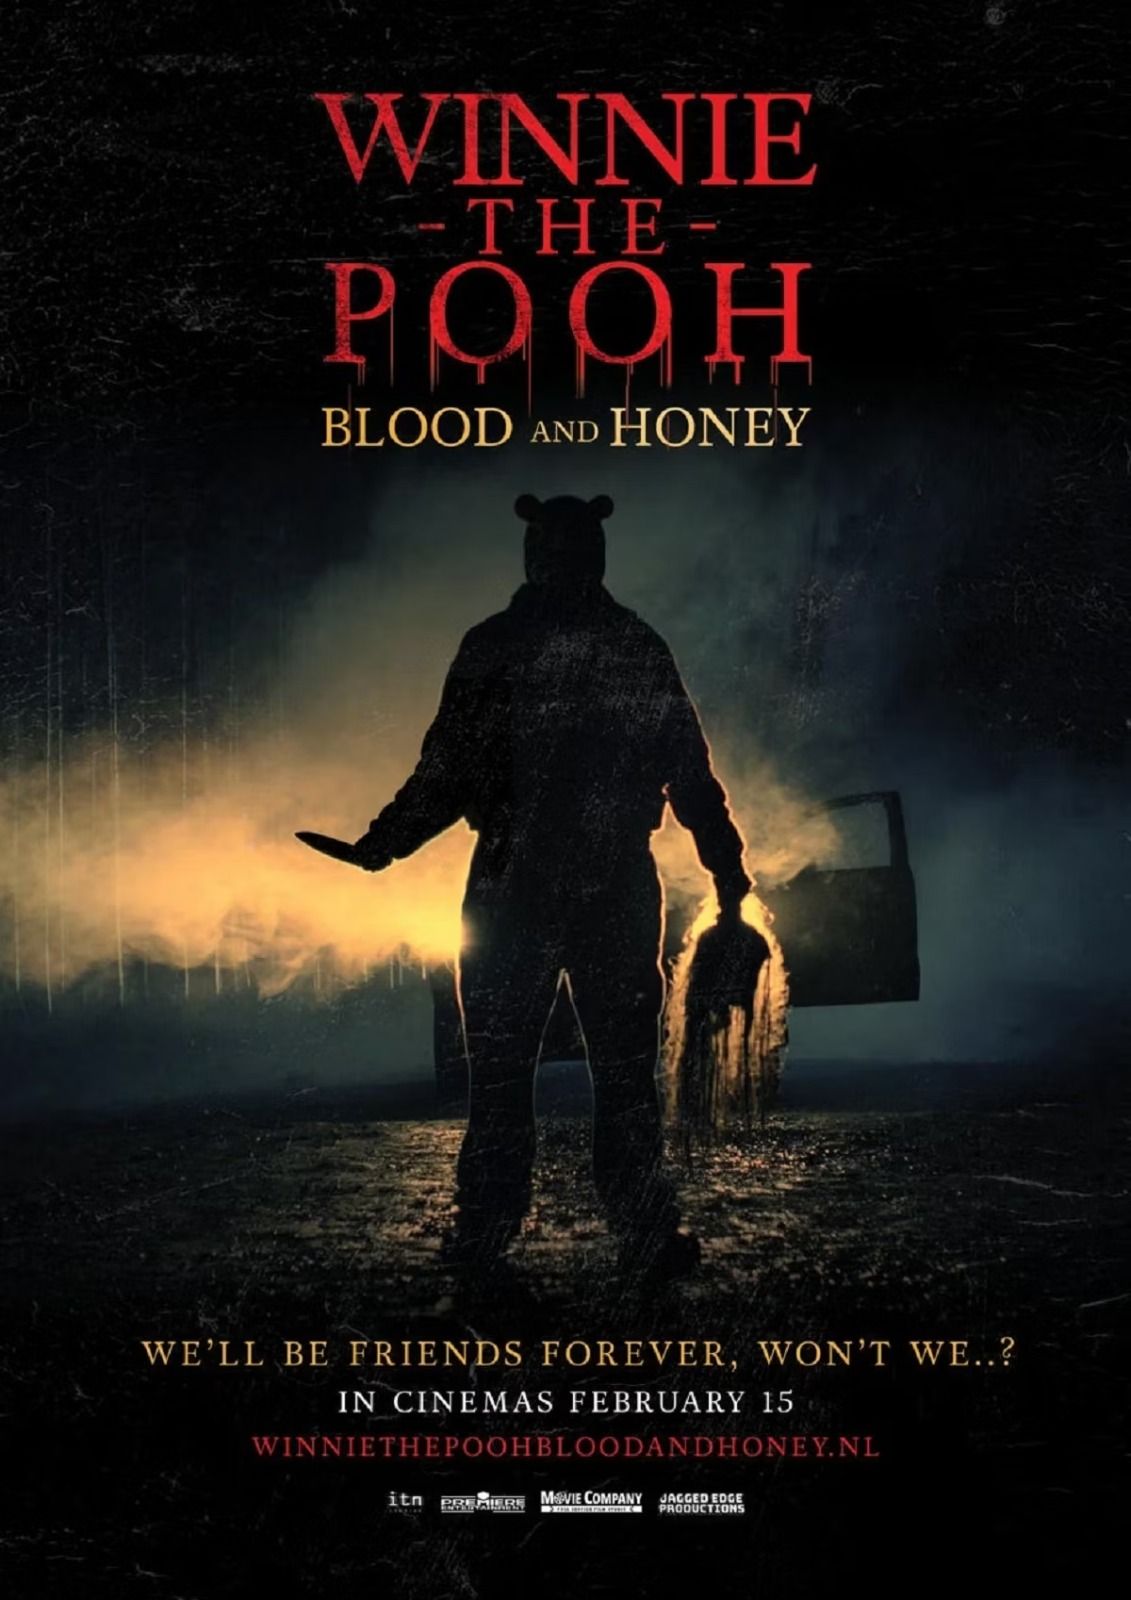 Winnine the pooh blood and honey poster